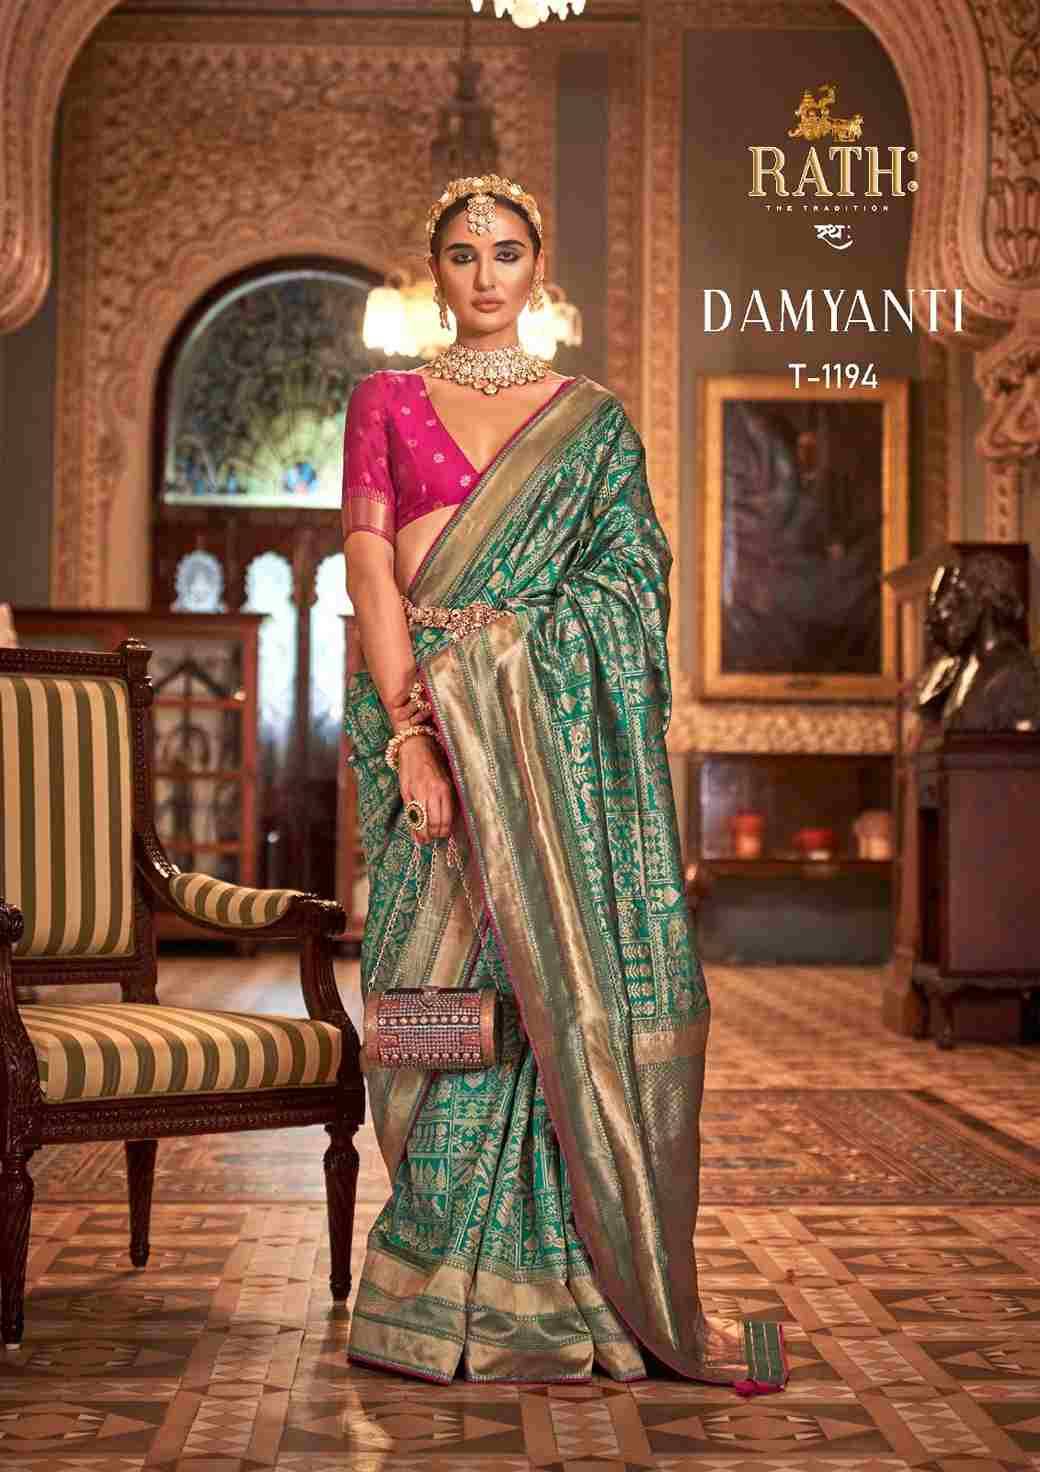 Damyanti By Rath 1190 To 1198 Series Indian Traditional Wear Collection Beautiful Stylish Fancy Colorful Party Wear & Occasional Wear Pure Silk Sarees At Wholesale Price